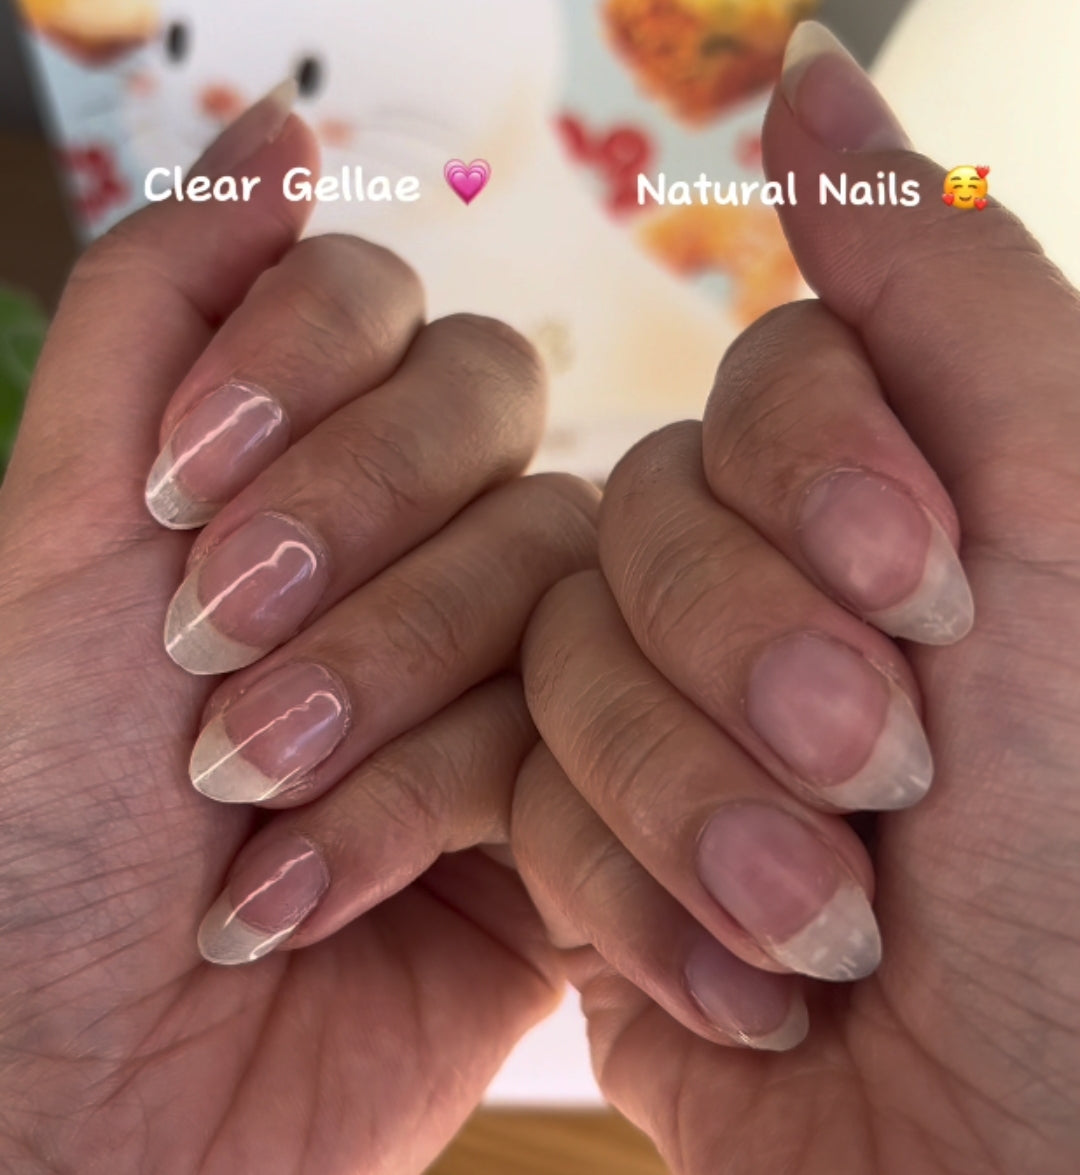 Crystal Clear DIY Semicured Gel Nail Sticker Kit (STOP NAIL BITING & GROW BRITTLE NAILS)